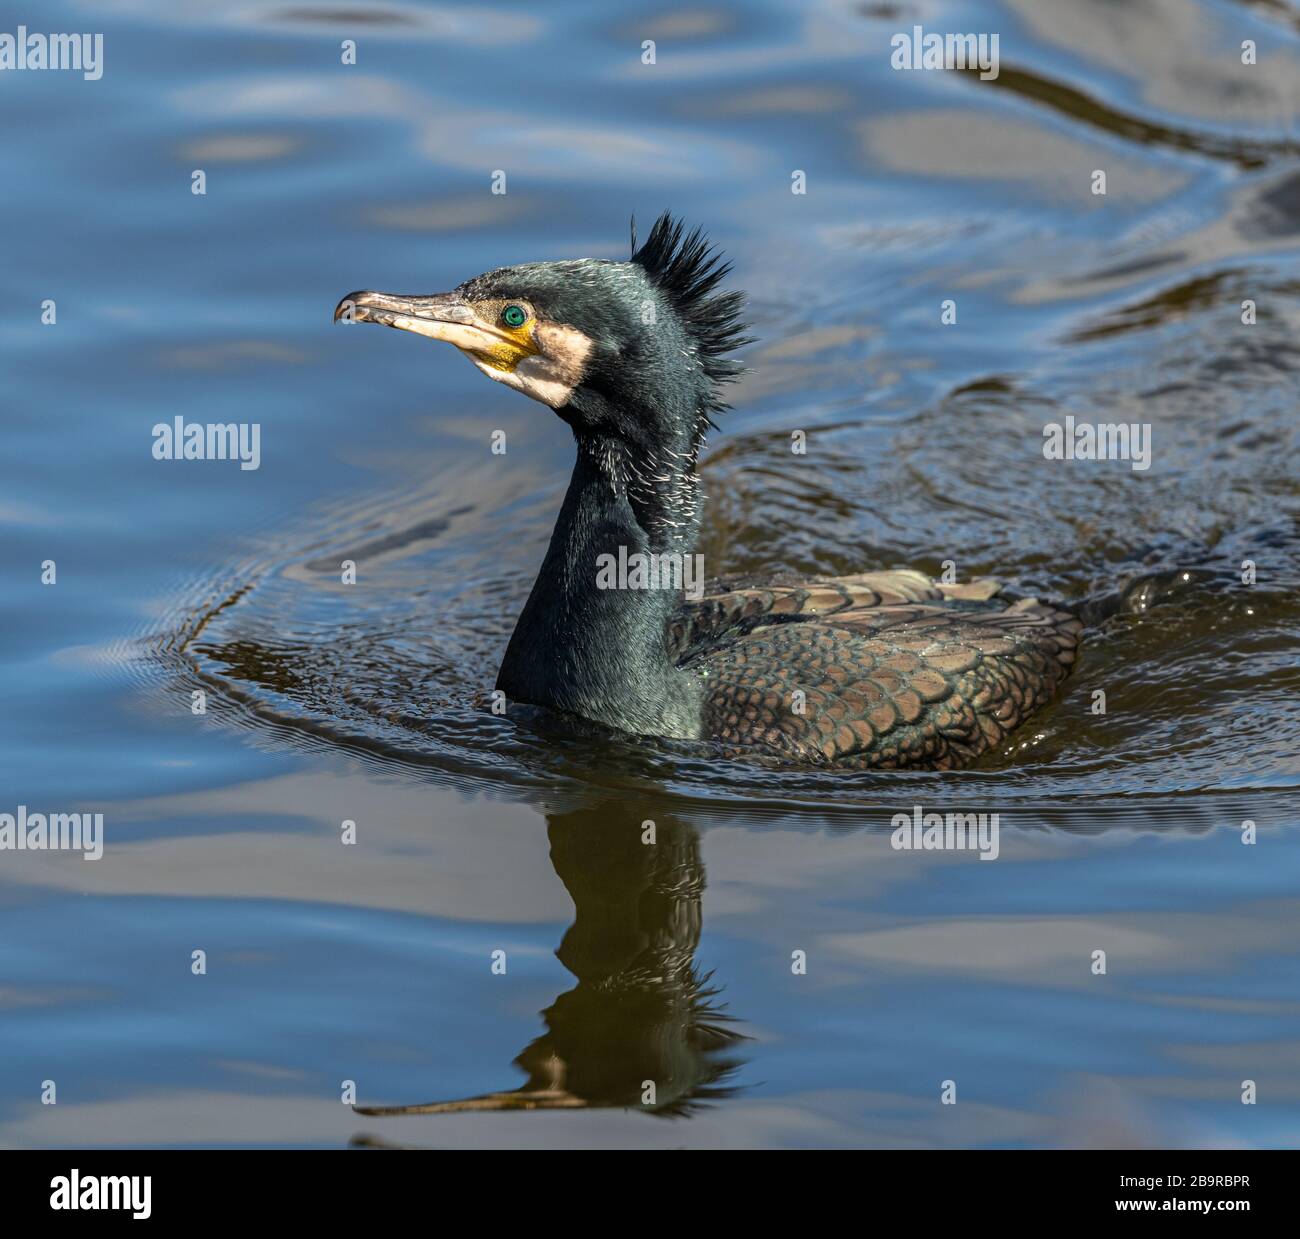 black cormorant with punk hair swimming in the water, animal wild Stock Photo